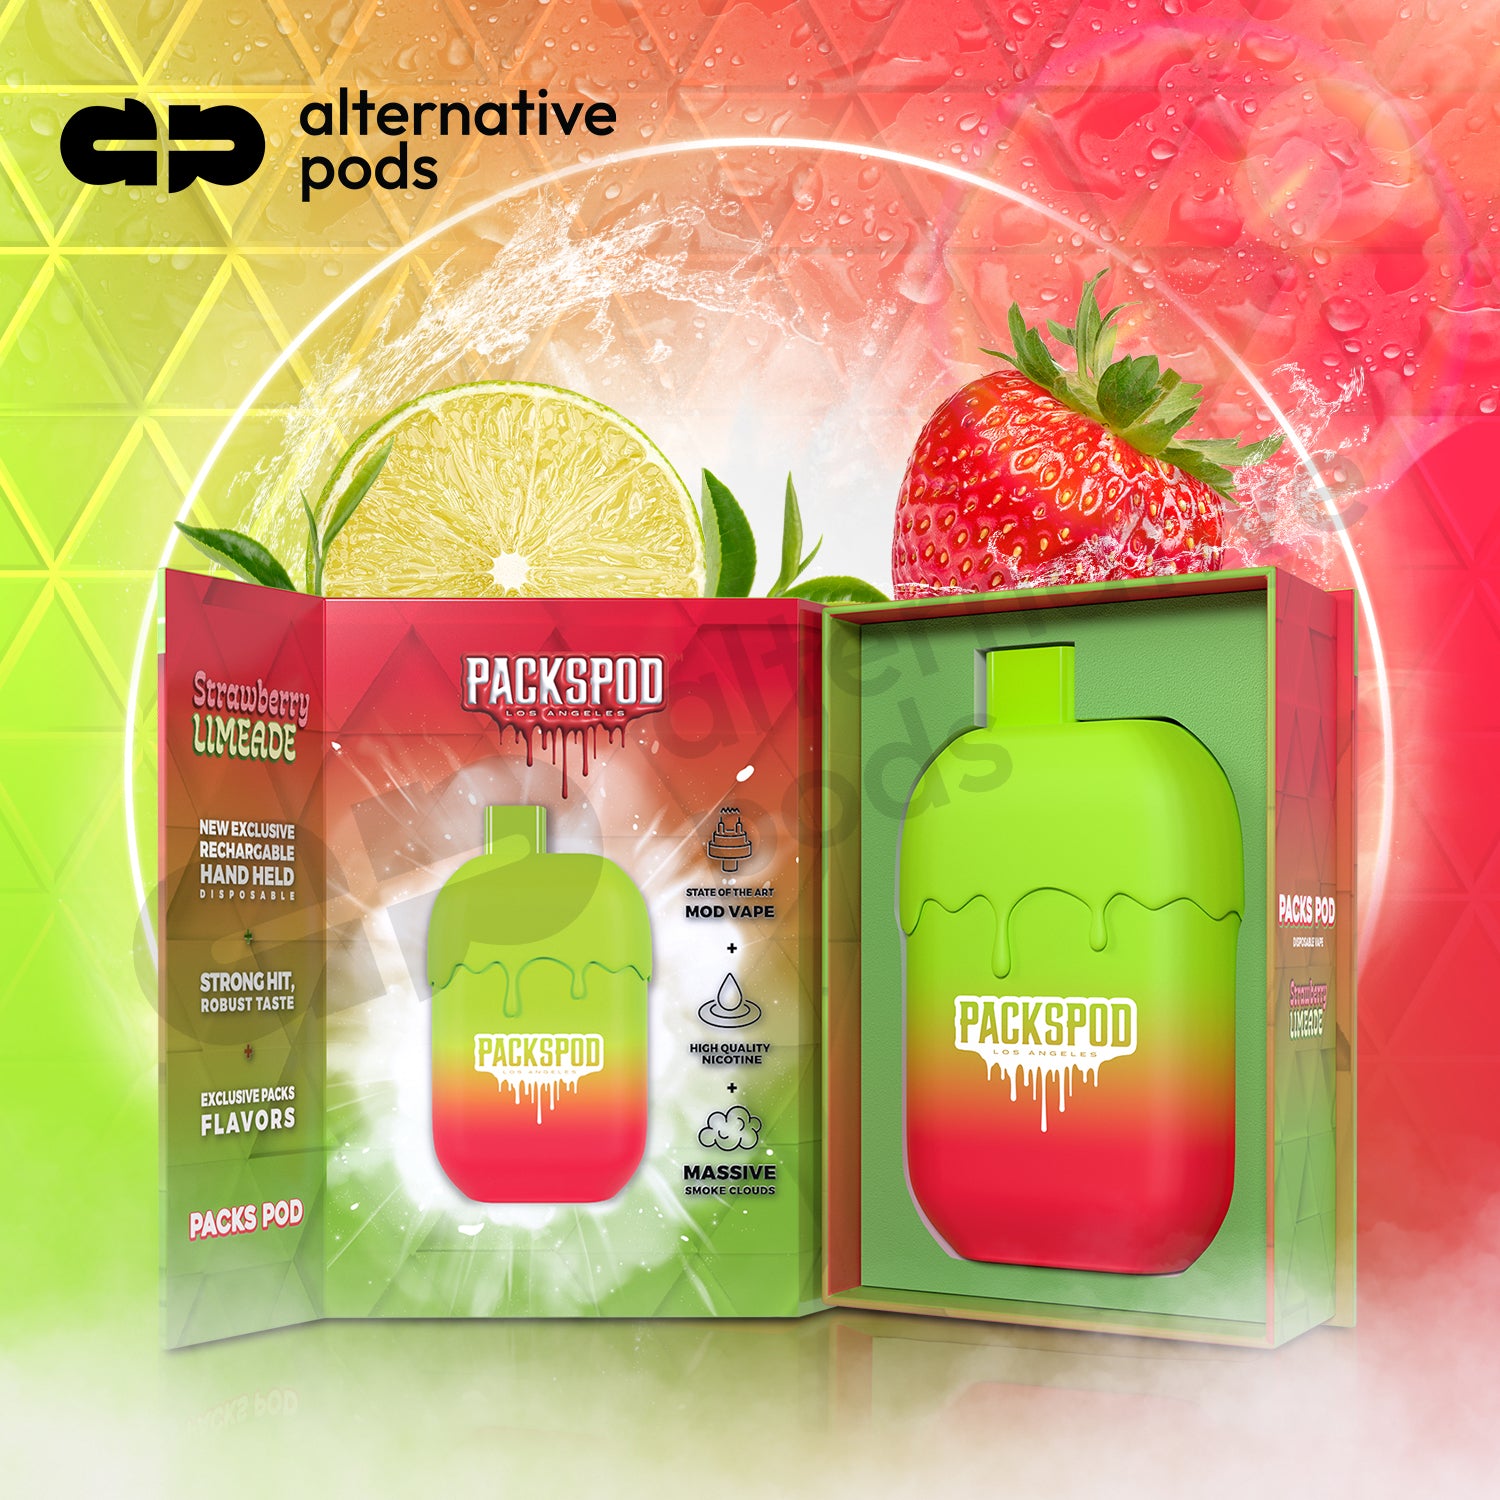 Packspod 5000 Puffs Rechargeable Disposable Device-Strawberry Limeade